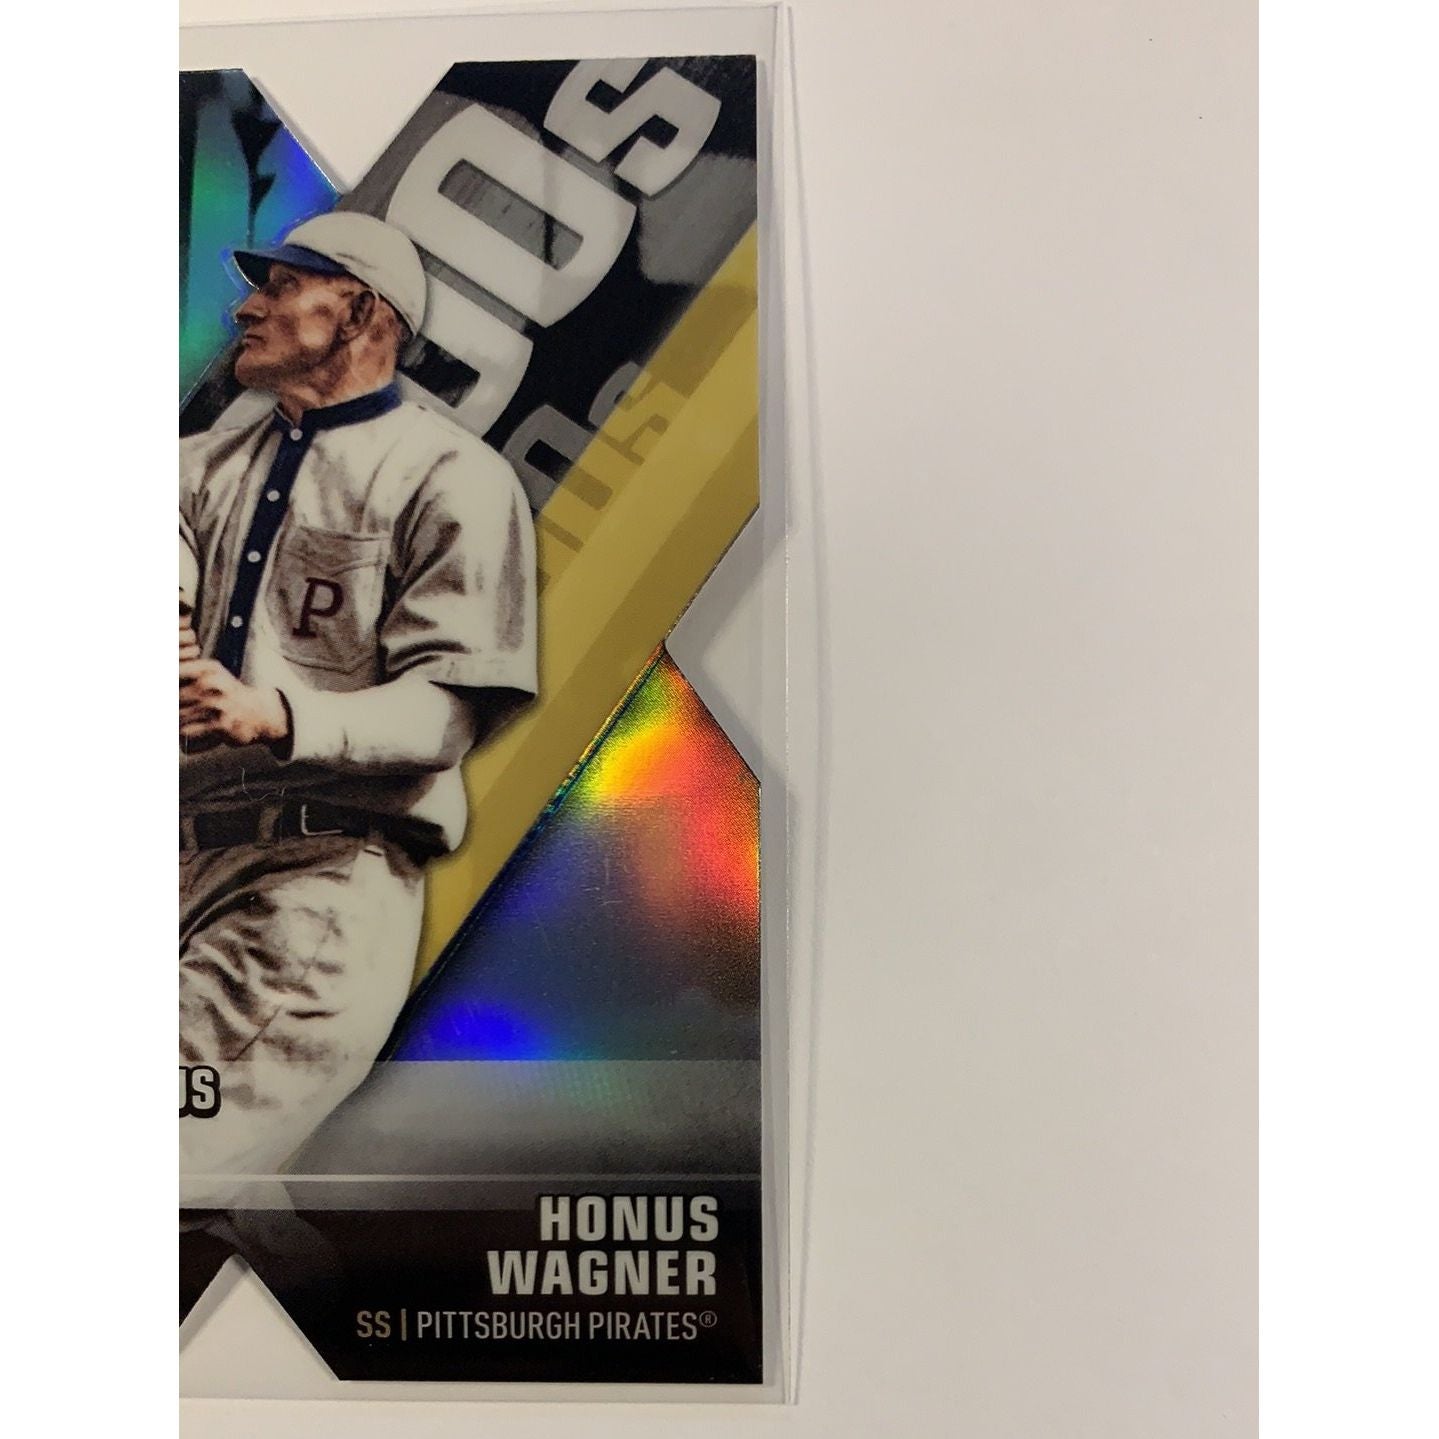  2020 Topps Chrome Honus Wagner Decade of Dominance Die Cut  Local Legends Cards & Collectibles